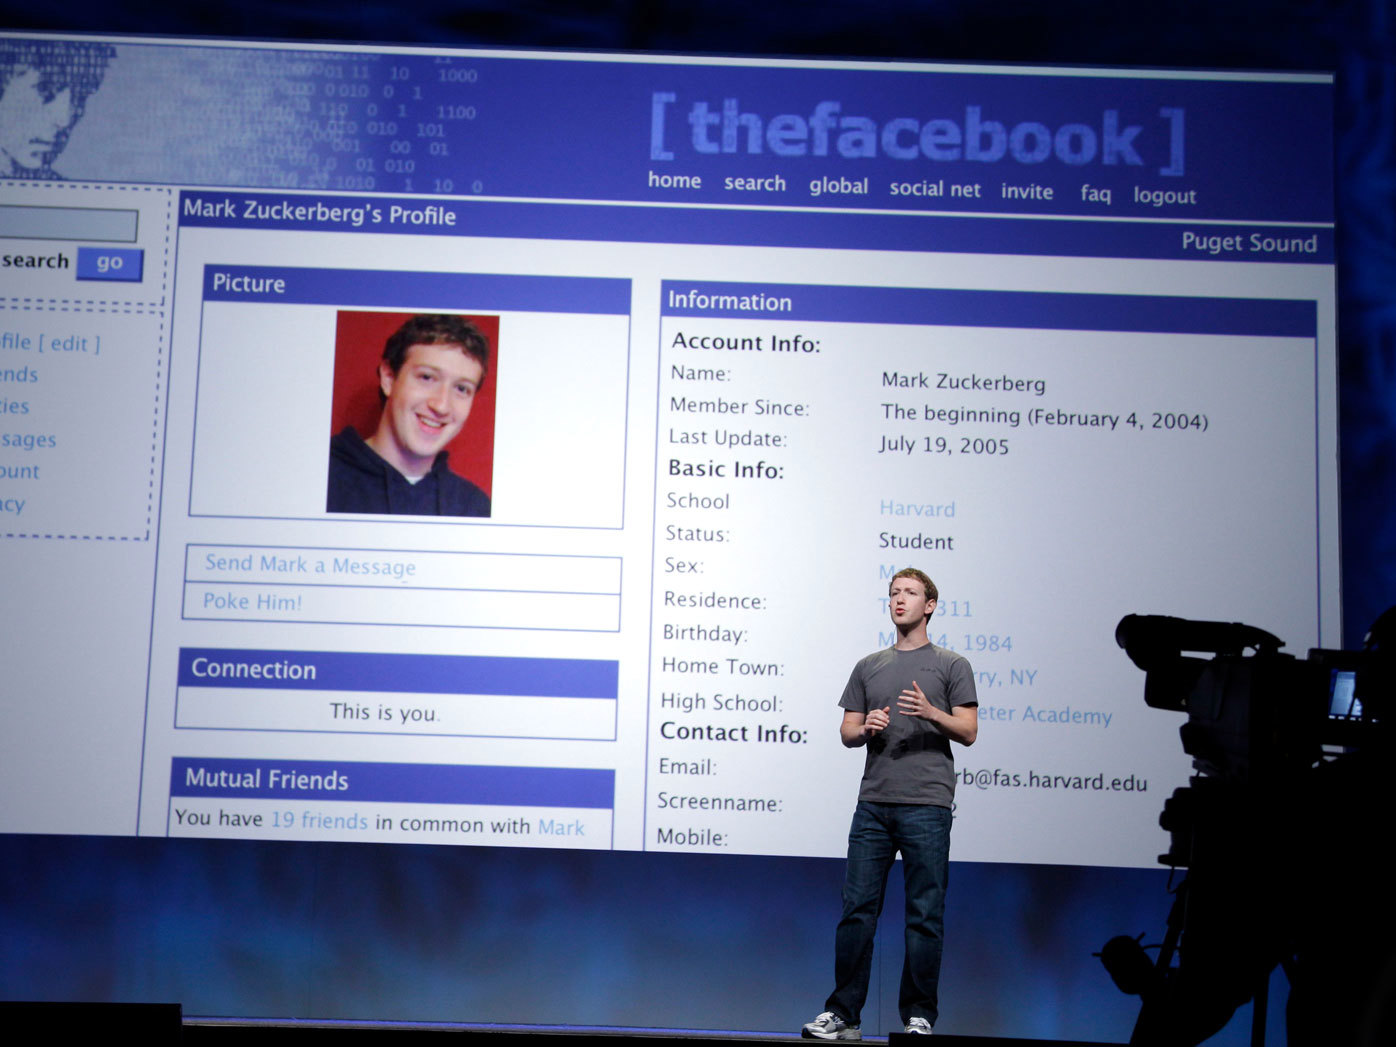 Facebook founder Mark Zuckerberg talks about an old Facebook web page during the 2011 F8 conference in San Francisco.